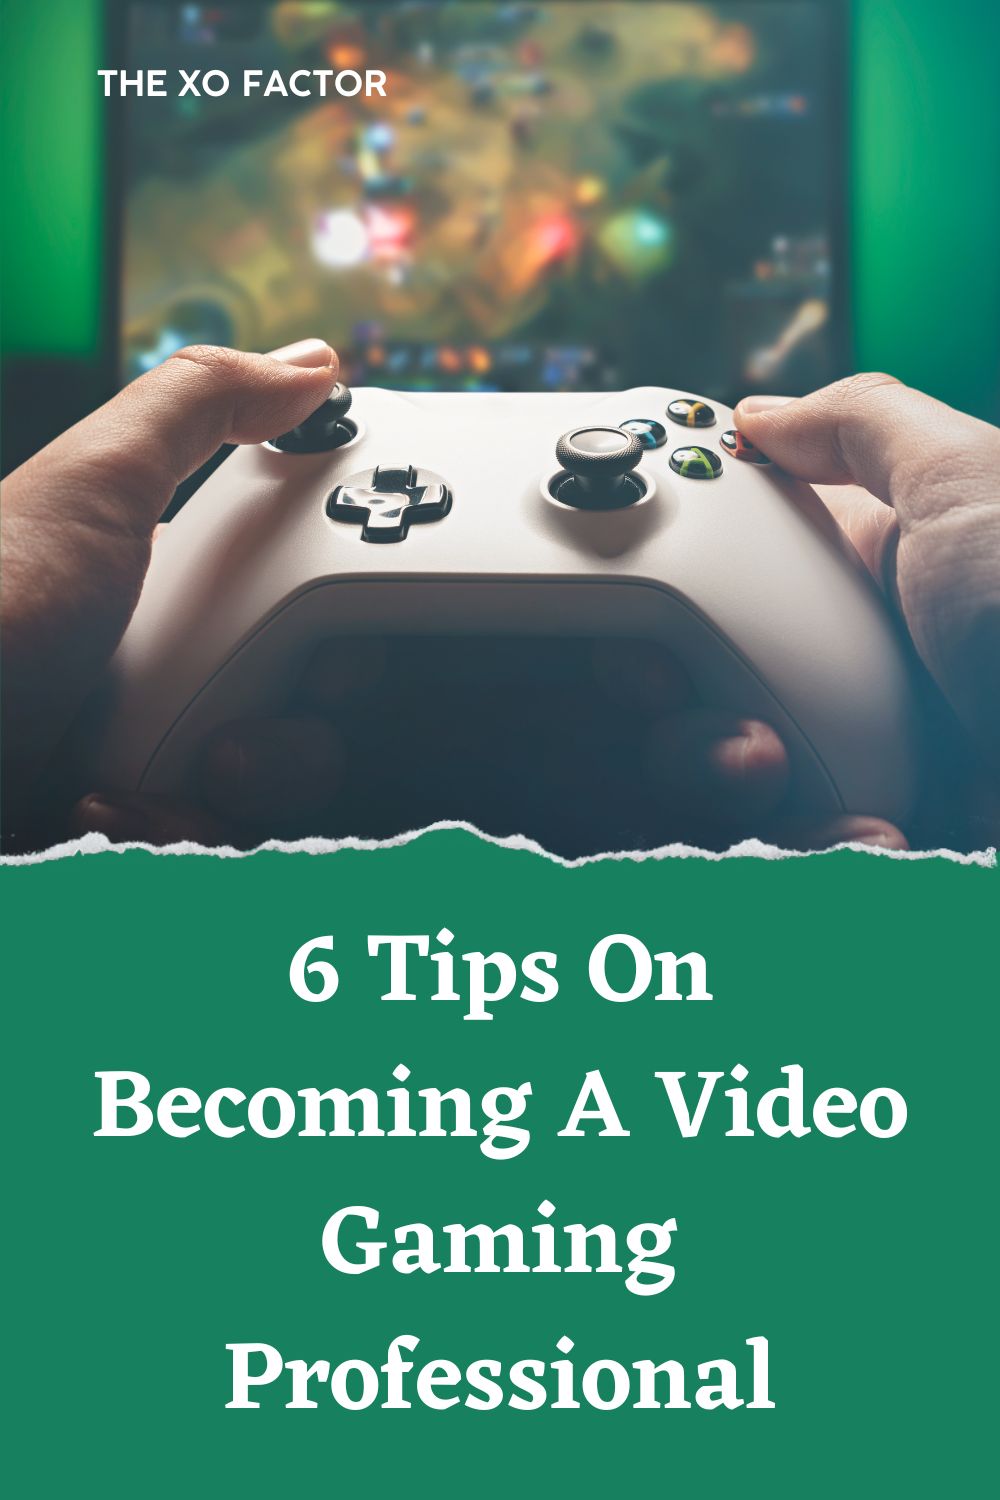 Tips On Becoming A Video Gaming Professional